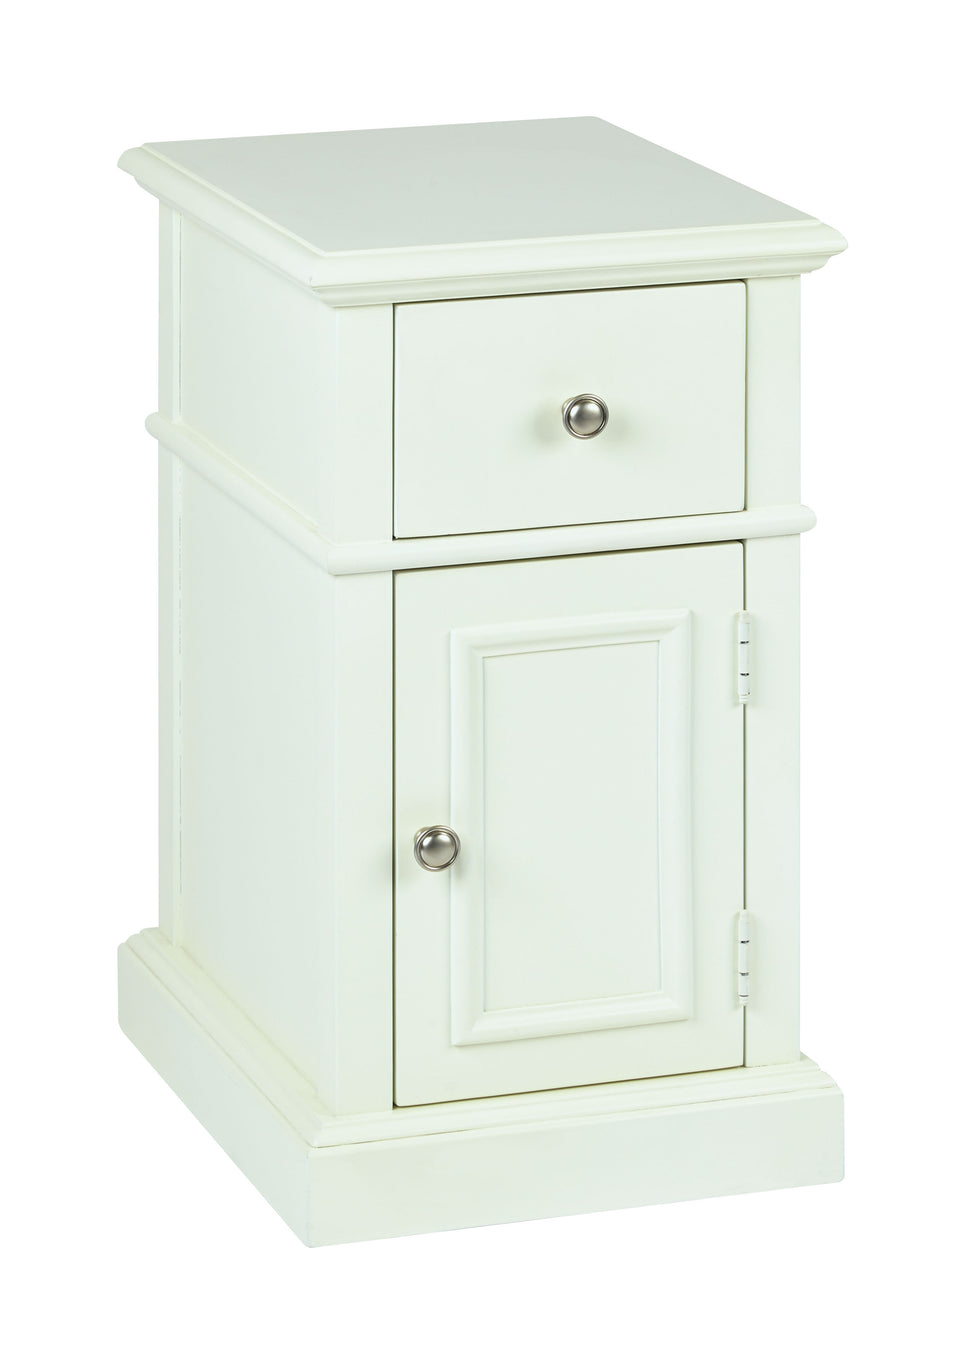 oxford white side table with single drawer and door with metal knob closed view